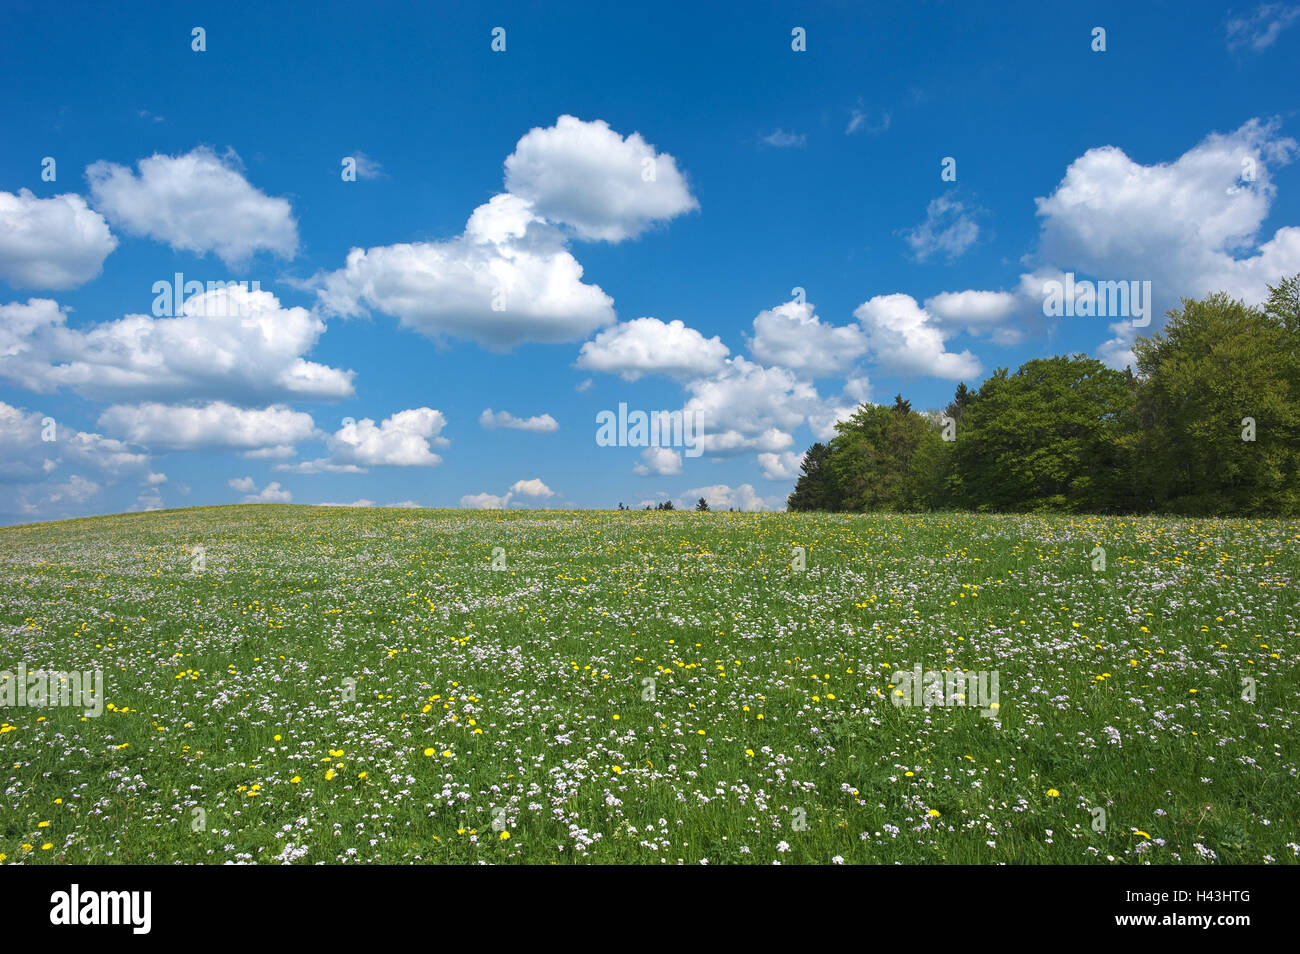 Germany, Upper Bavaria, flower meadow, heaven, blue, cumulus clouds, Bavaria, meadow, flowers, white, yellow, spring, hill, hilly, rurally, scenery, deciduous forest, wood, trees, nature, green, meadow scenery, clouds, nobody, Stock Photo